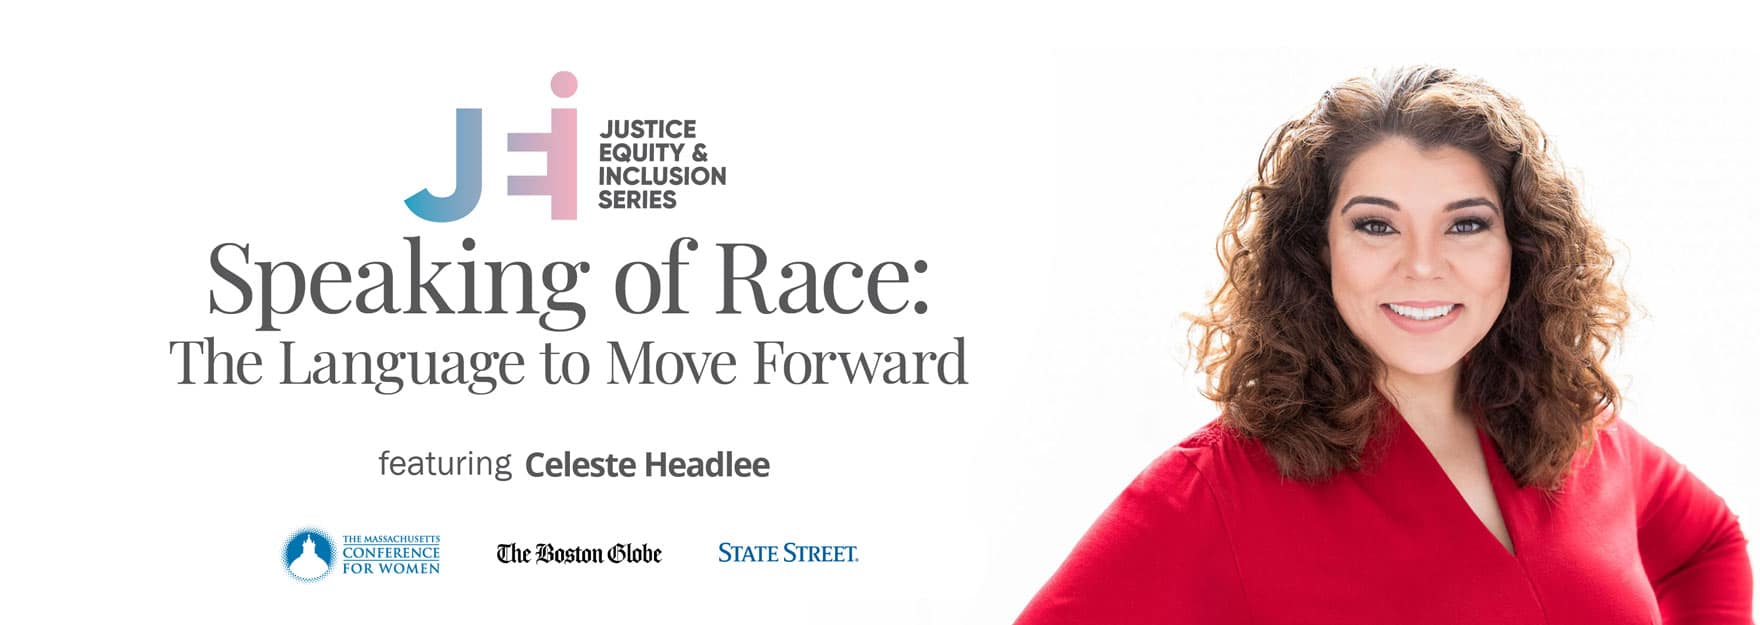 Speaking of Race: The Language to Move Forward featuring Celeste Headlee